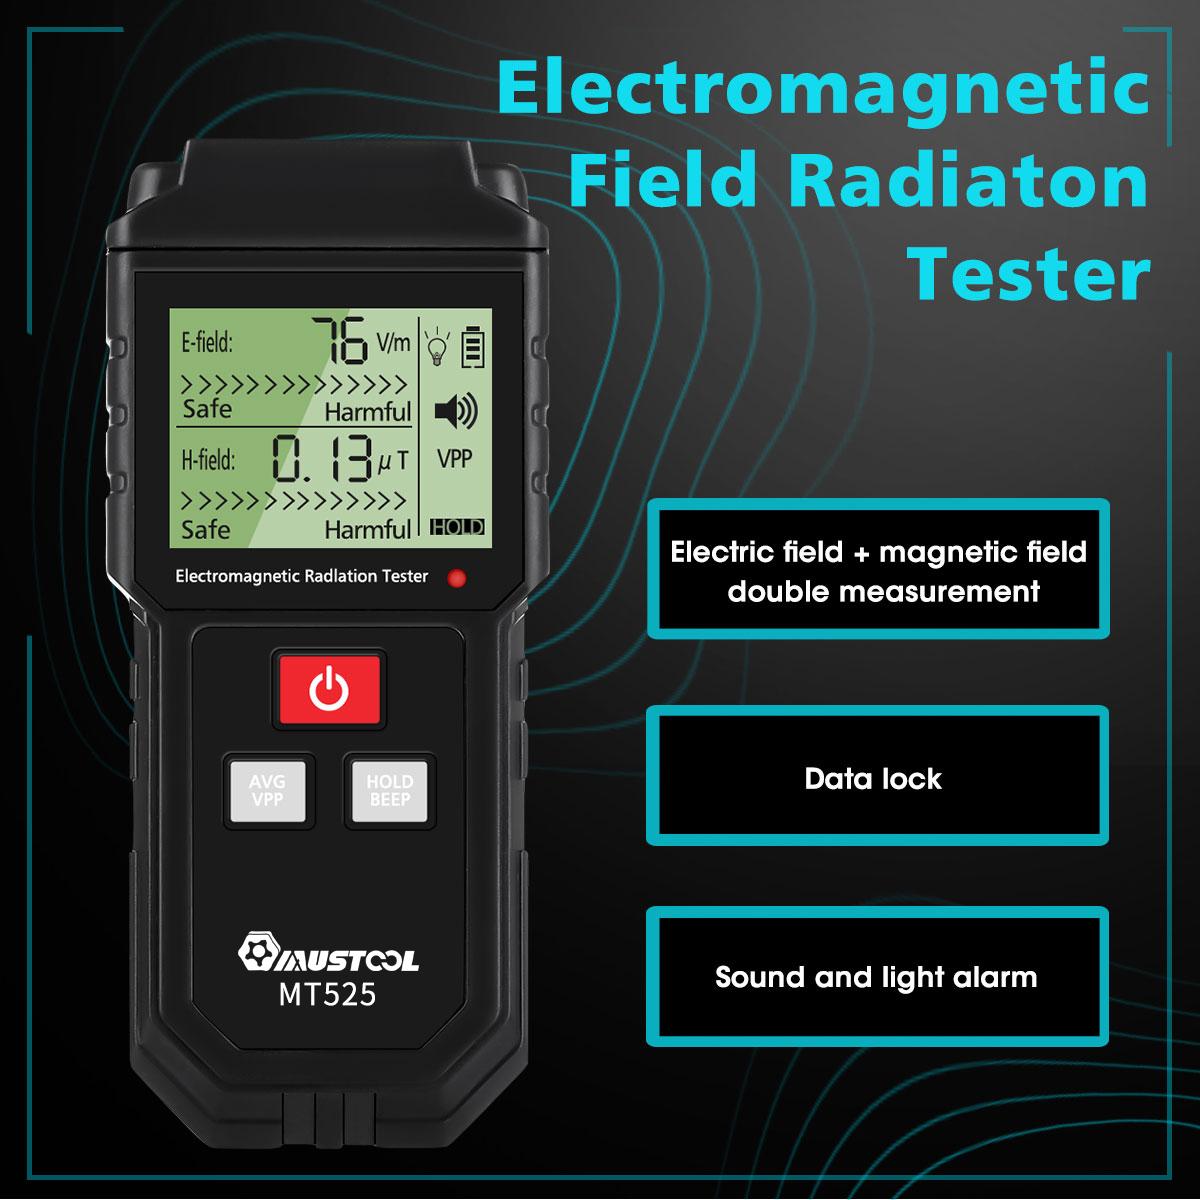 MUSTOOL MT525 Electromagnetic Radiation Tester Electric Field & Magnetic Field Dosimeter Tester Sound and Light Alarm 46